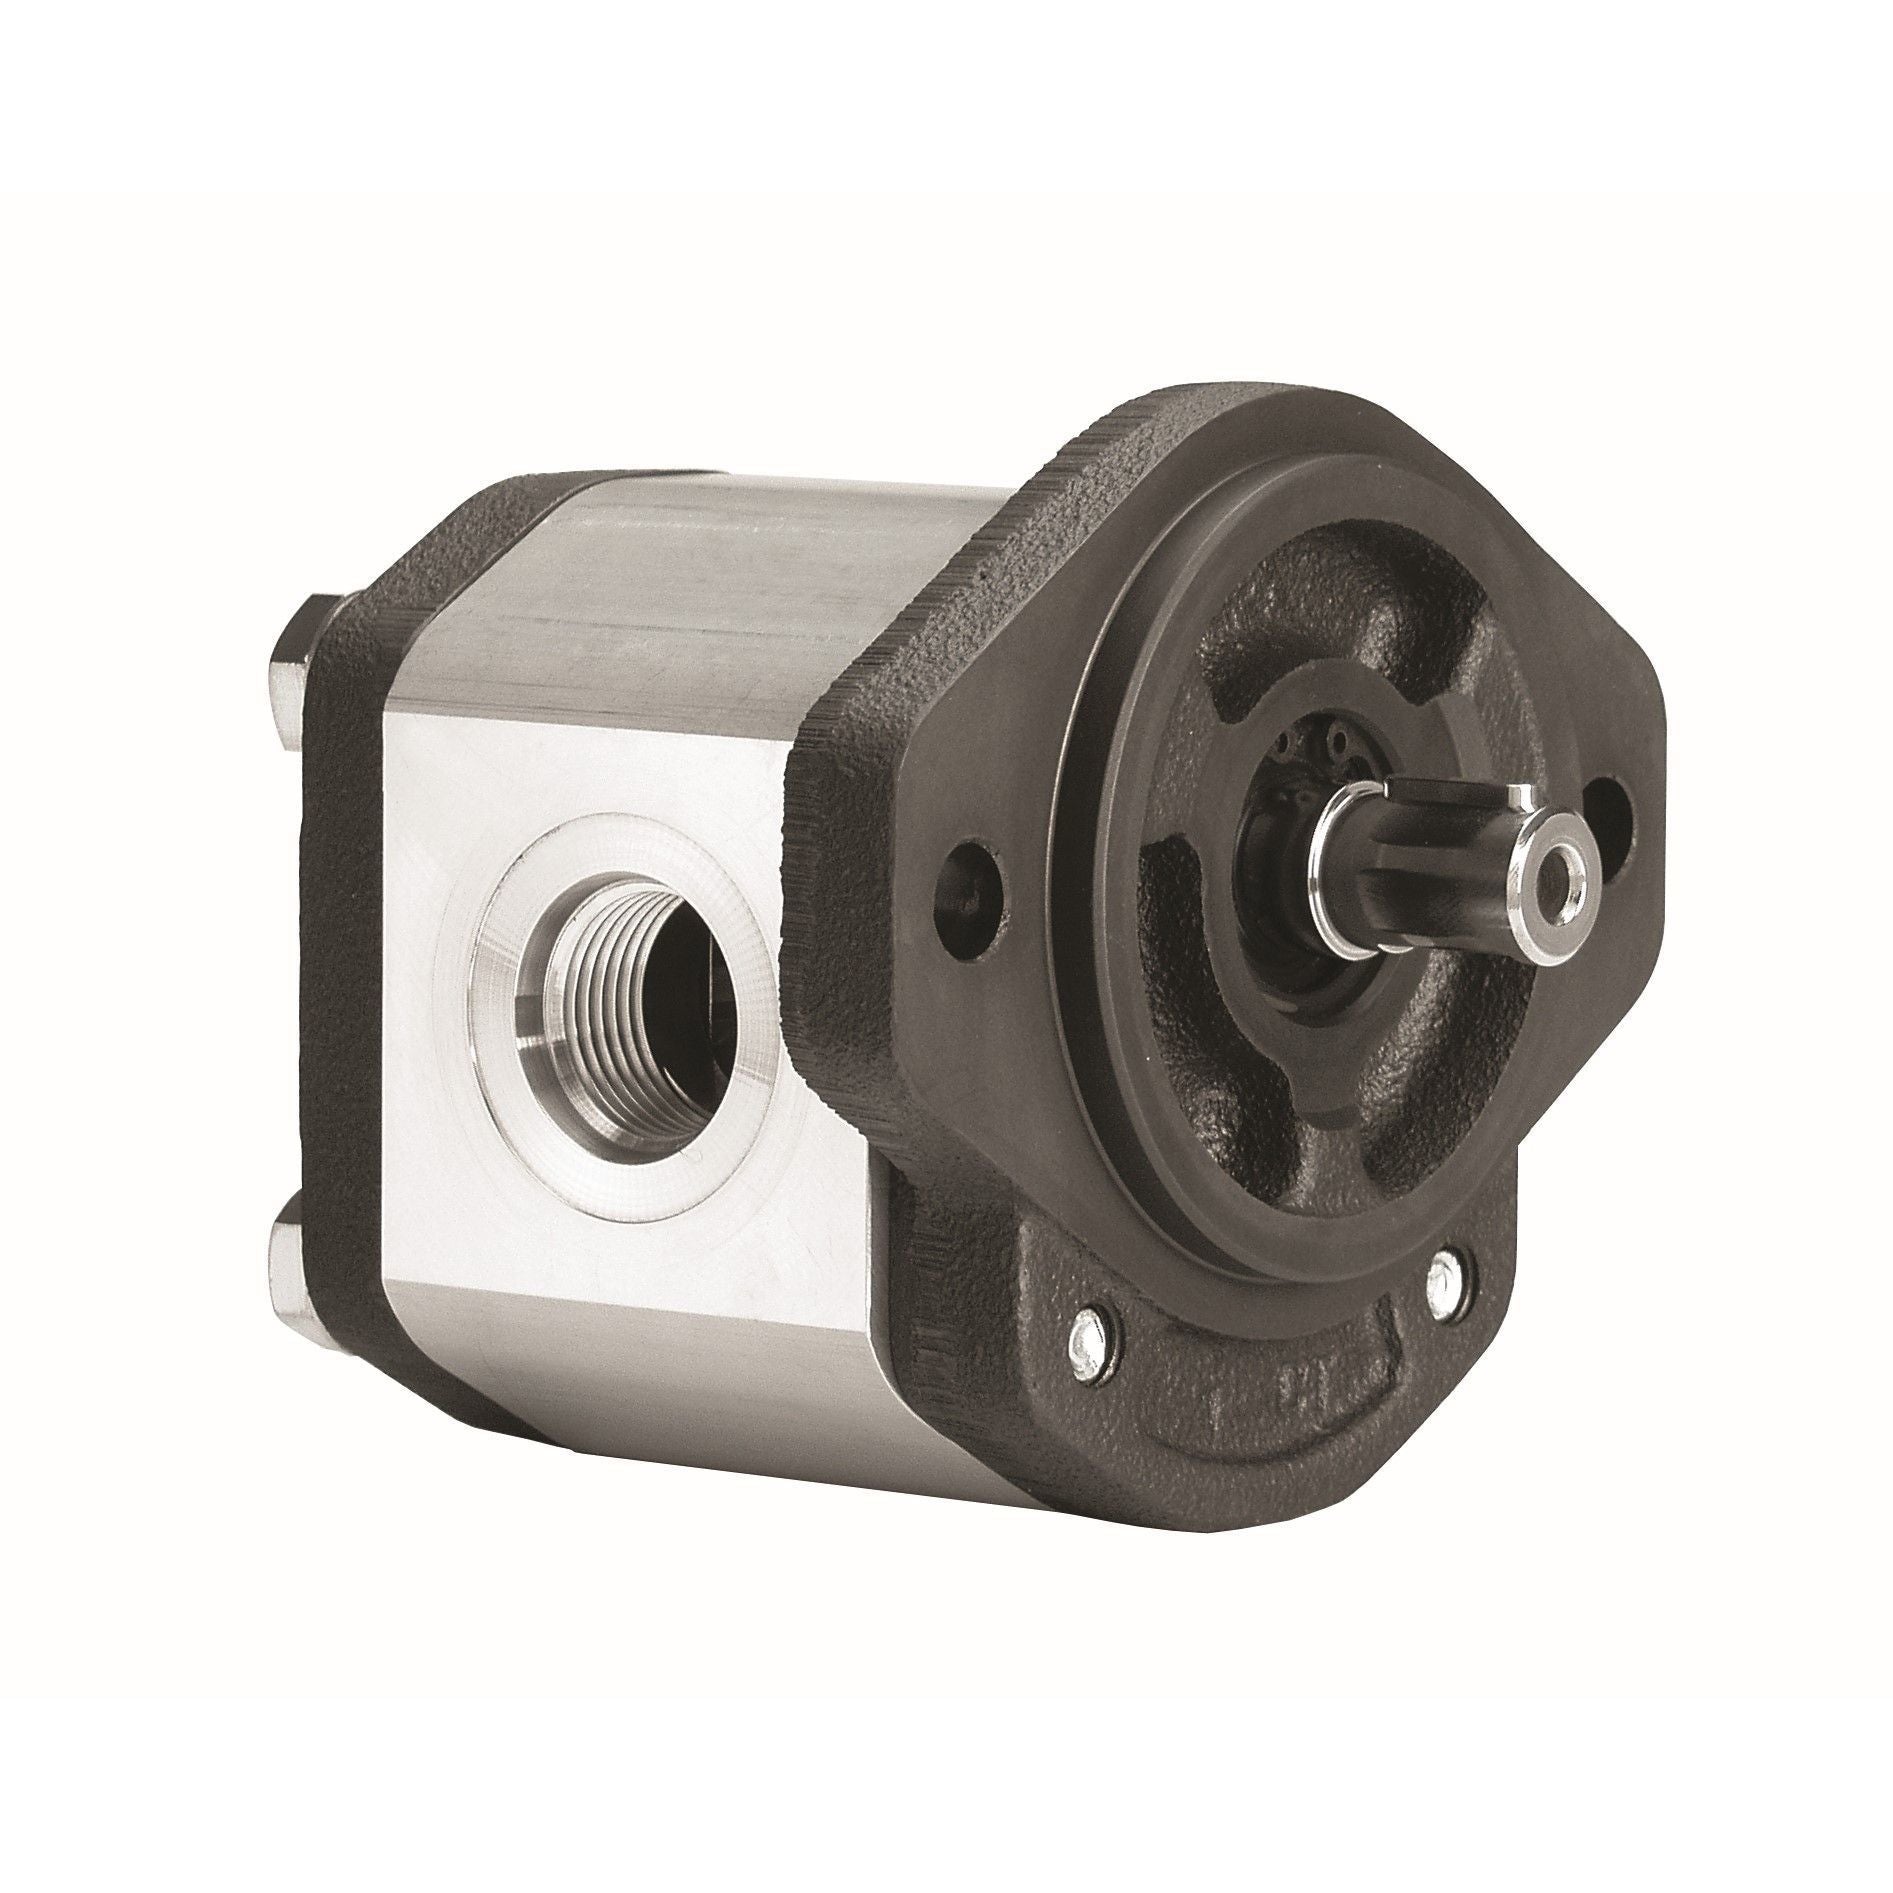 GHP2A-D-20 : Marzocchi Gear Pump, CW, 14.1cc (0.8601in3), 6.7 GPM, 3770psi, 3200 RPM, #12 SAE (3/4") In, #10 SAE (5/8") Out, Keyed Shaft 5/8" Bore x 5/32" Key, SAE A 2-Bolt Mount